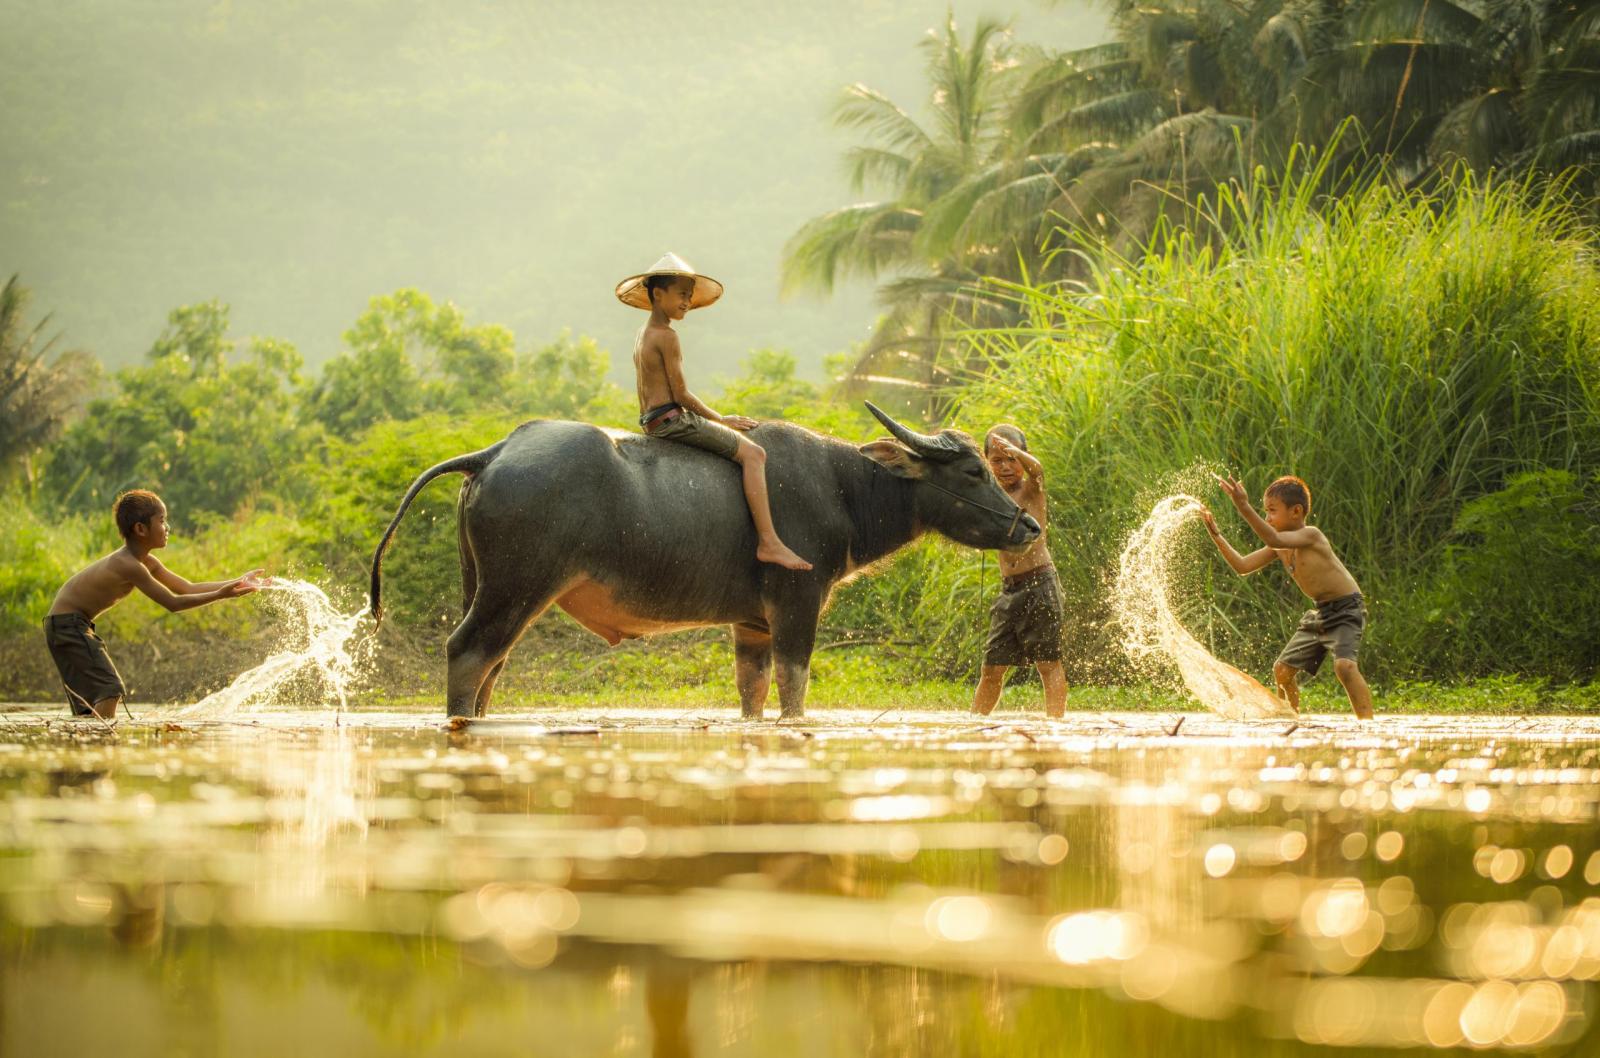 Asia children on river buffalo / The boys friend happy funny playing water and animal buffalo water on river with palm tree tropical background in the countryside of living life kids farmer asian